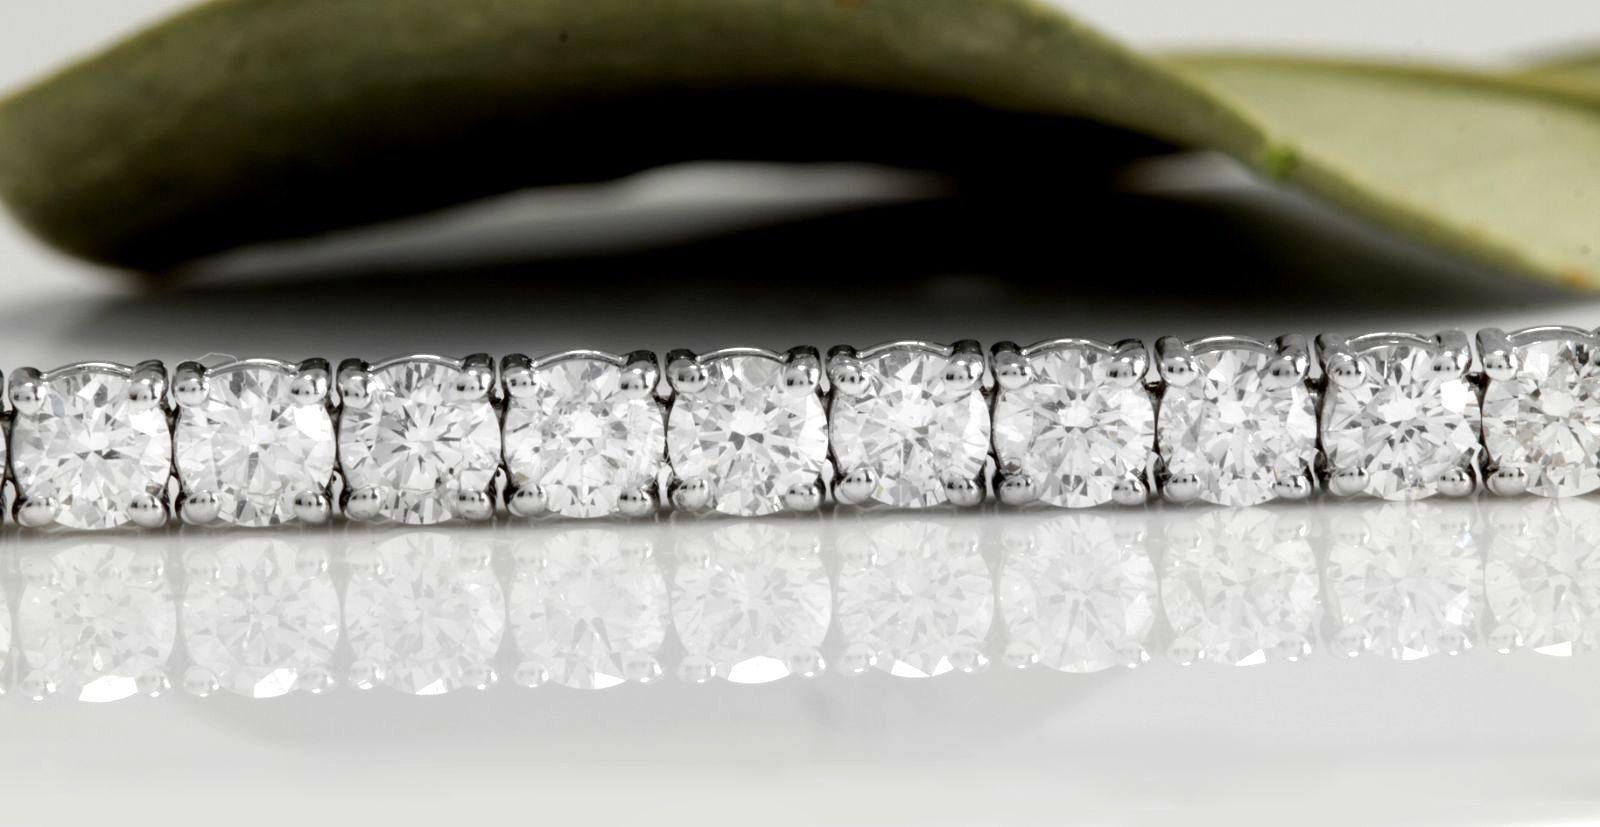 Very Impressive 3.75 Carats Natural VS Diamond 14K Solid White Gold Bracelet

STAMPED: 14K

Total Natural Round Diamonds Weight: 3.75 Carats (color F-G / Clarity VS1-VS2)

Bracelet Length is: 7 inches

Width: 3.18mm

Bracelet total weight: